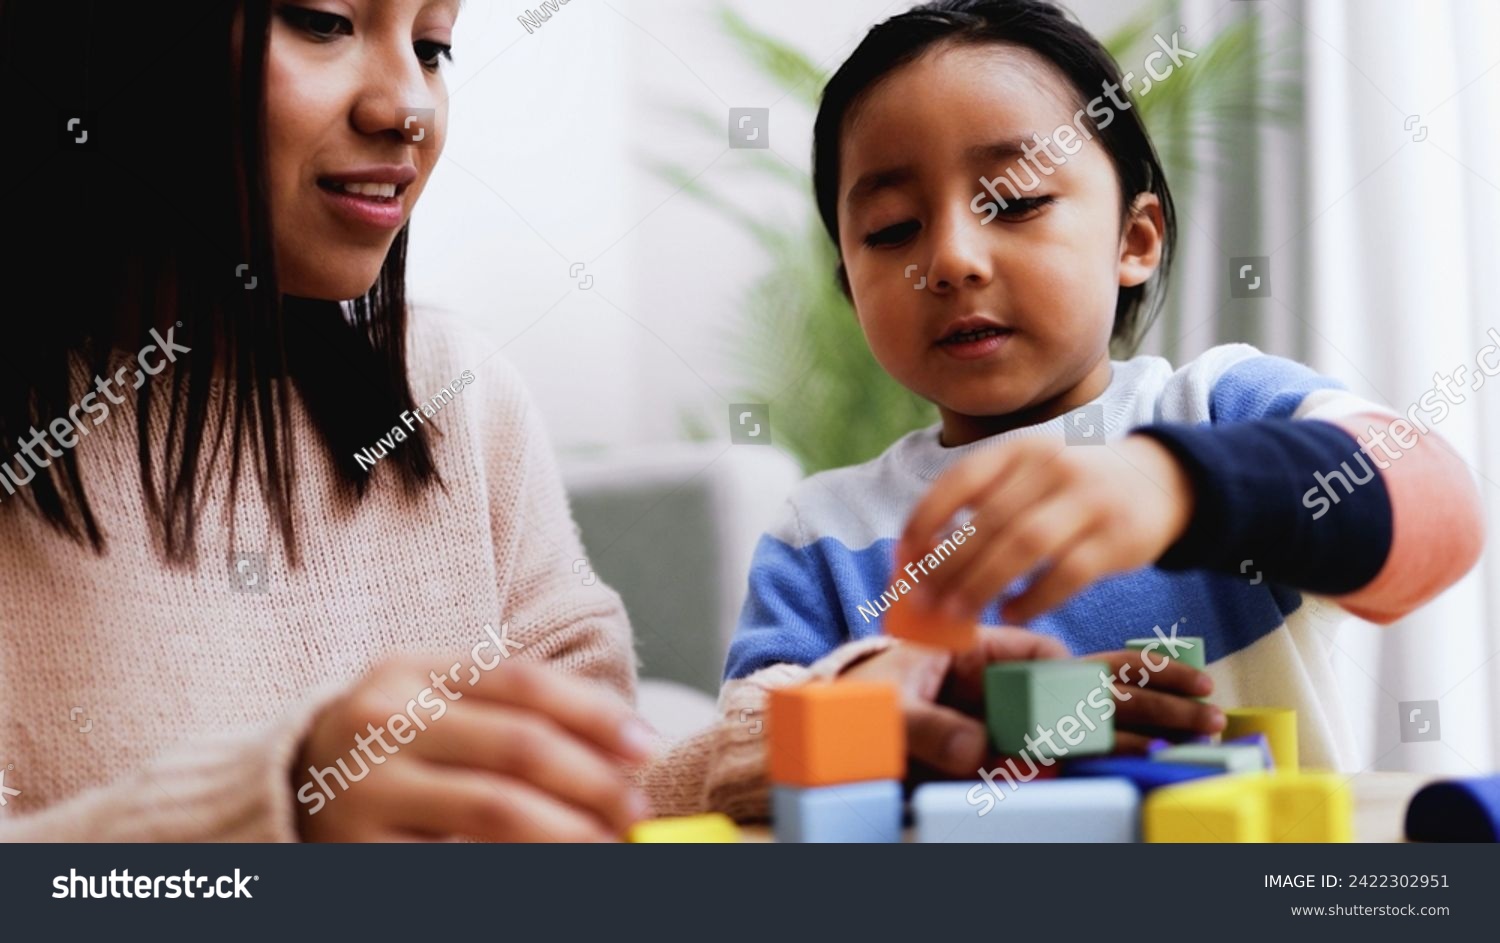 Latin American mother and son child having fun playing games with wood toy bricks at home. Education and family leisure time concept #2422302951